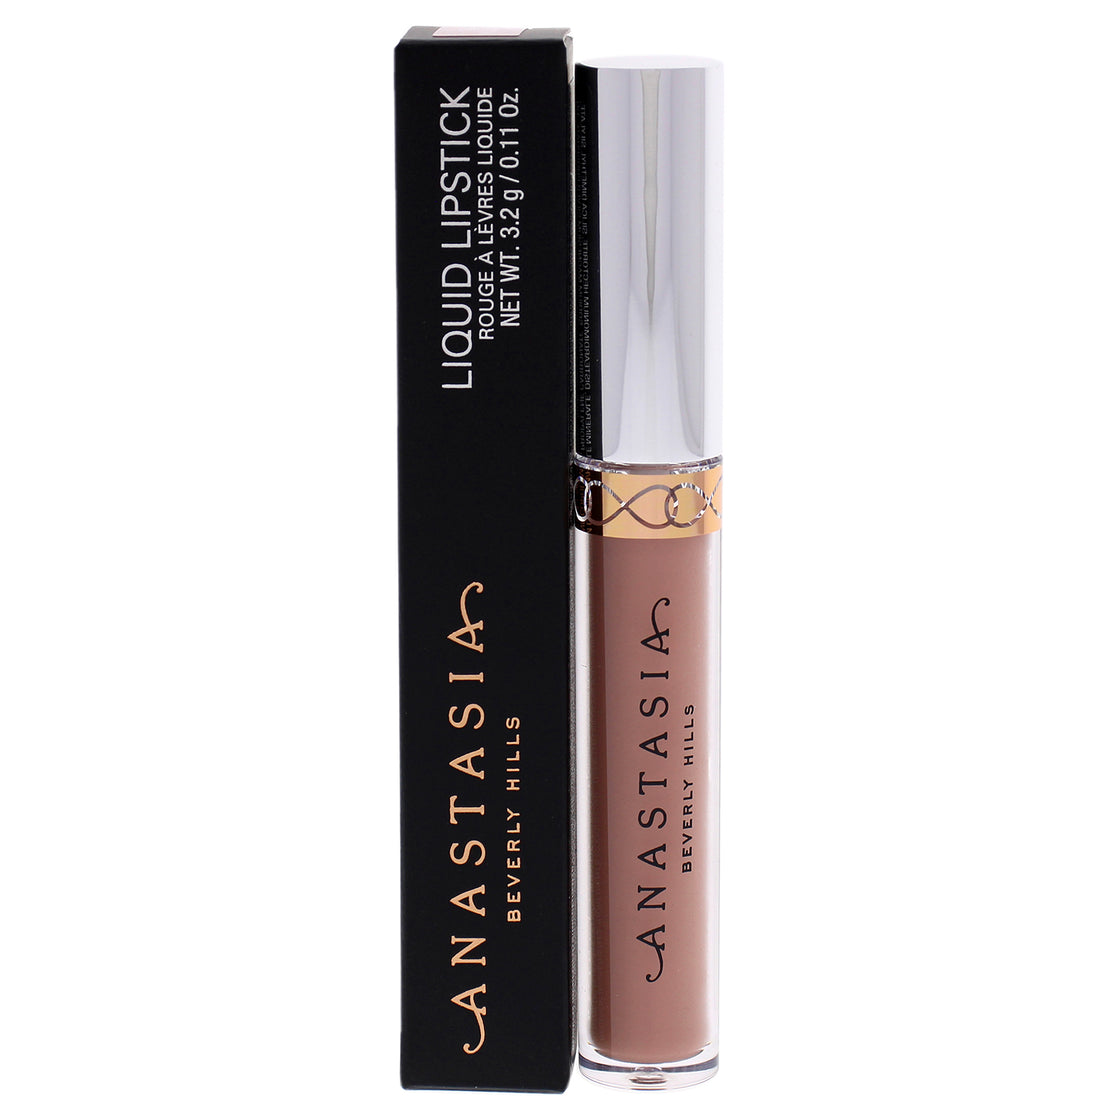 Liquid Lipstick - Pure Hollywood by Anastasia Beverly Hills for Women - 0.11 oz Lipstick